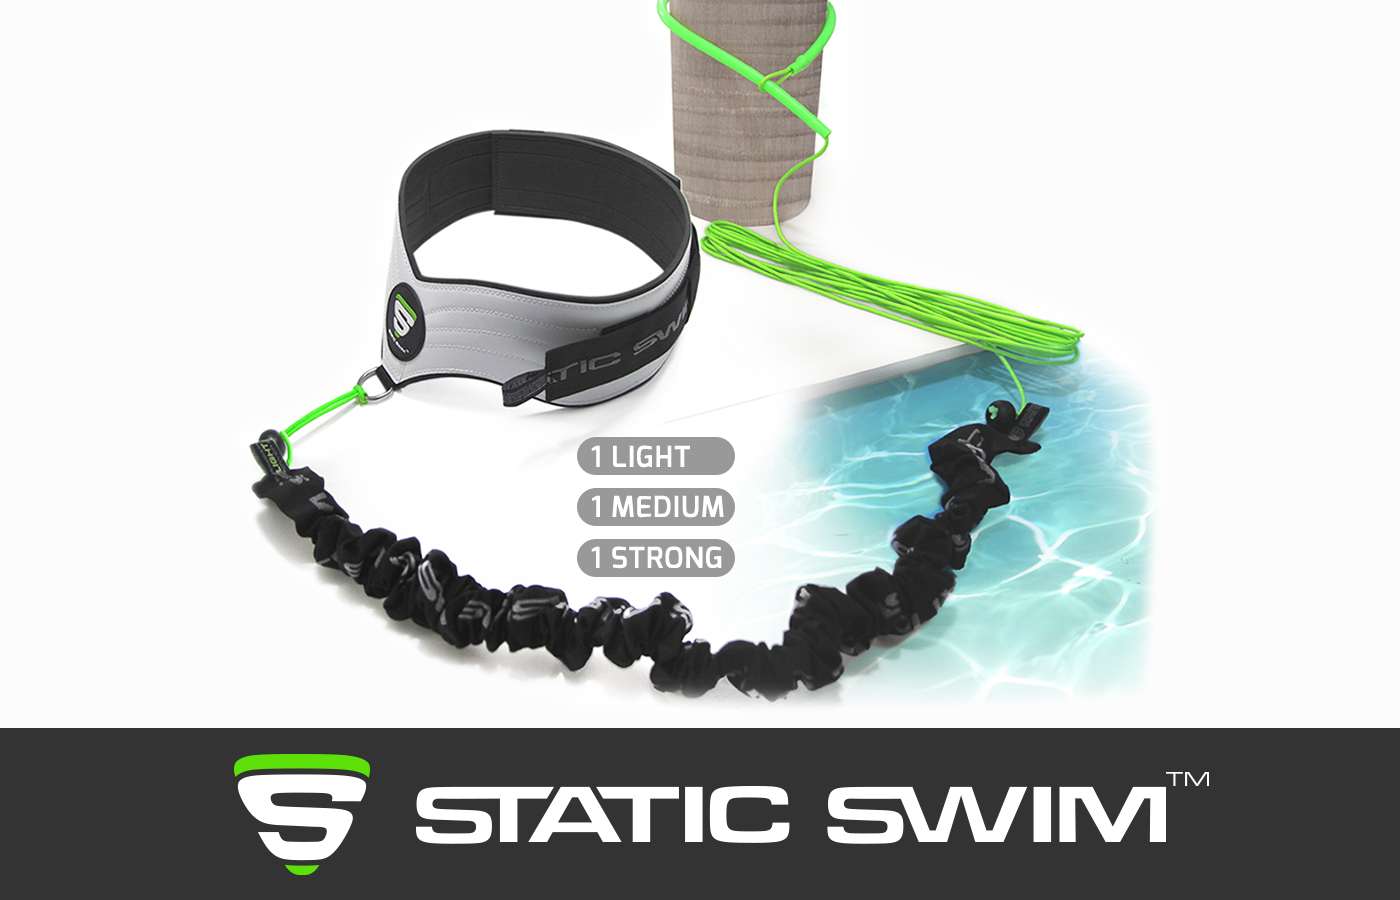 STATIC SWIM™'s swimming harness and resistance band with Lasso/Extension device